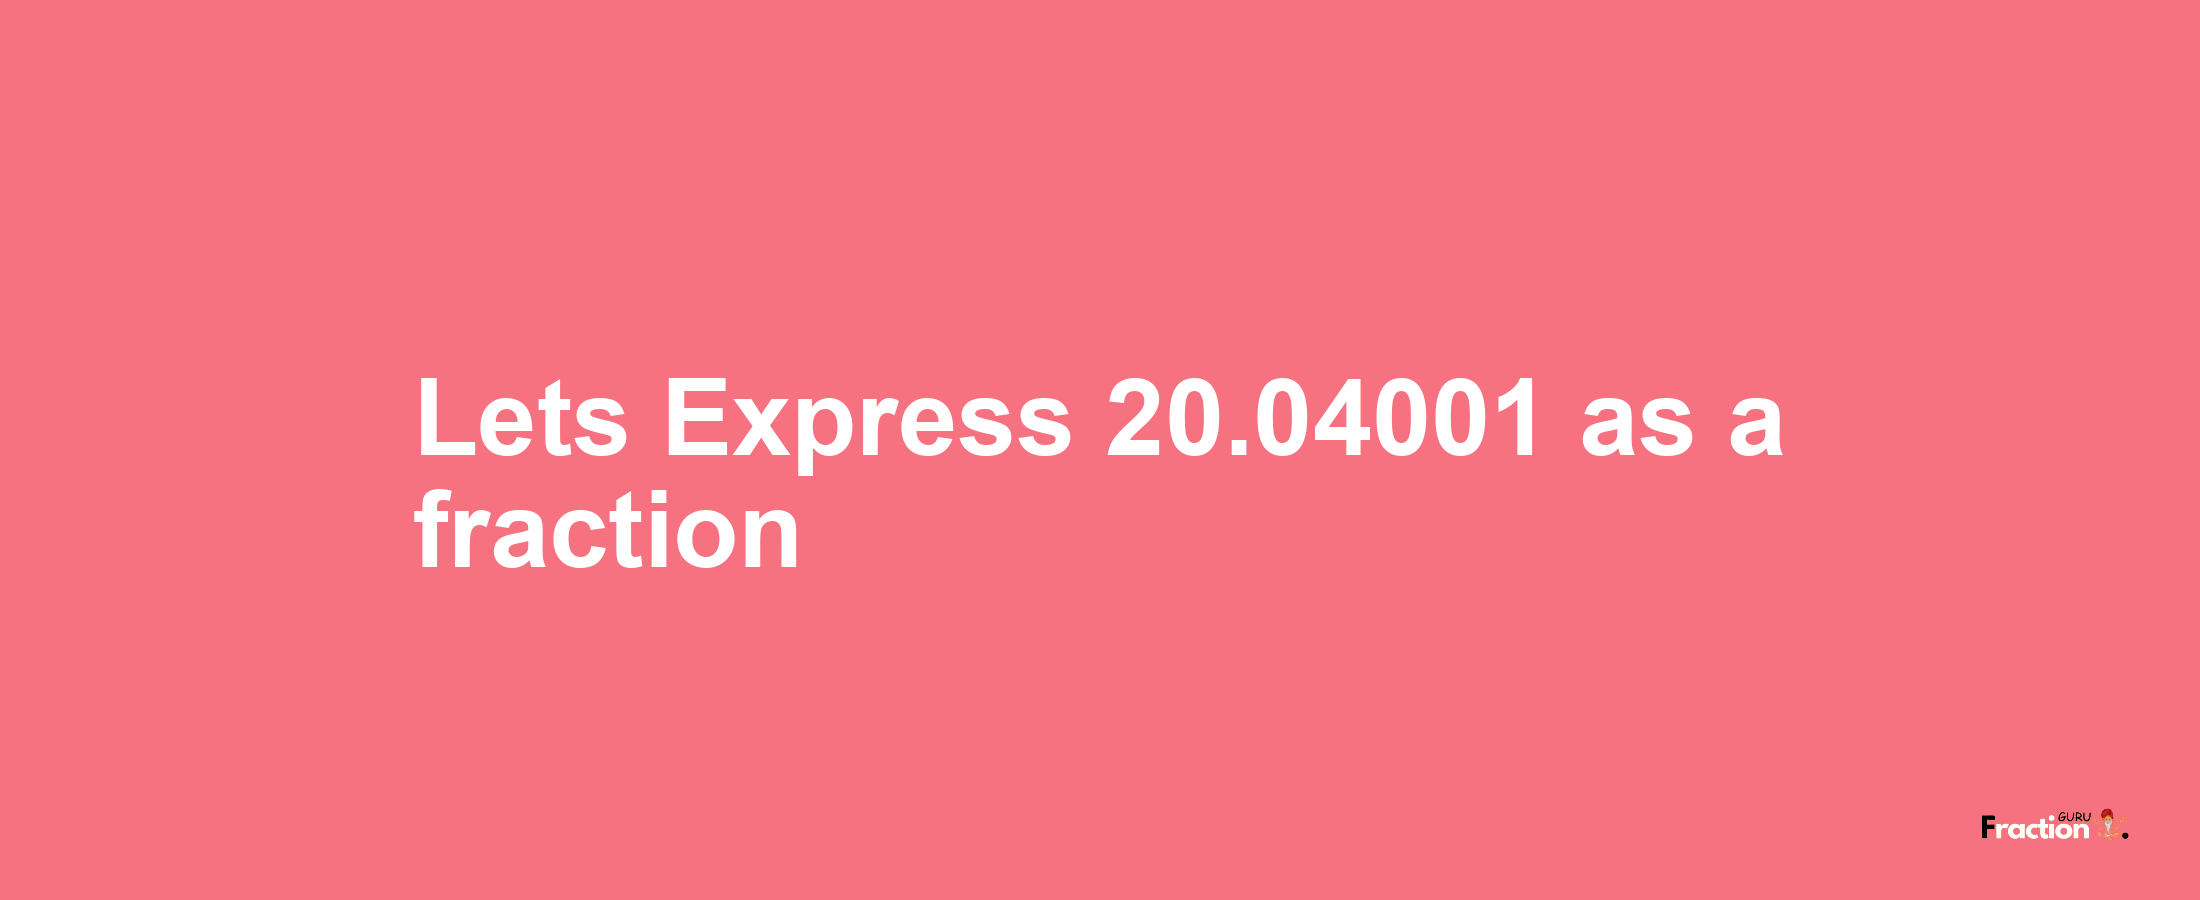 Lets Express 20.04001 as afraction